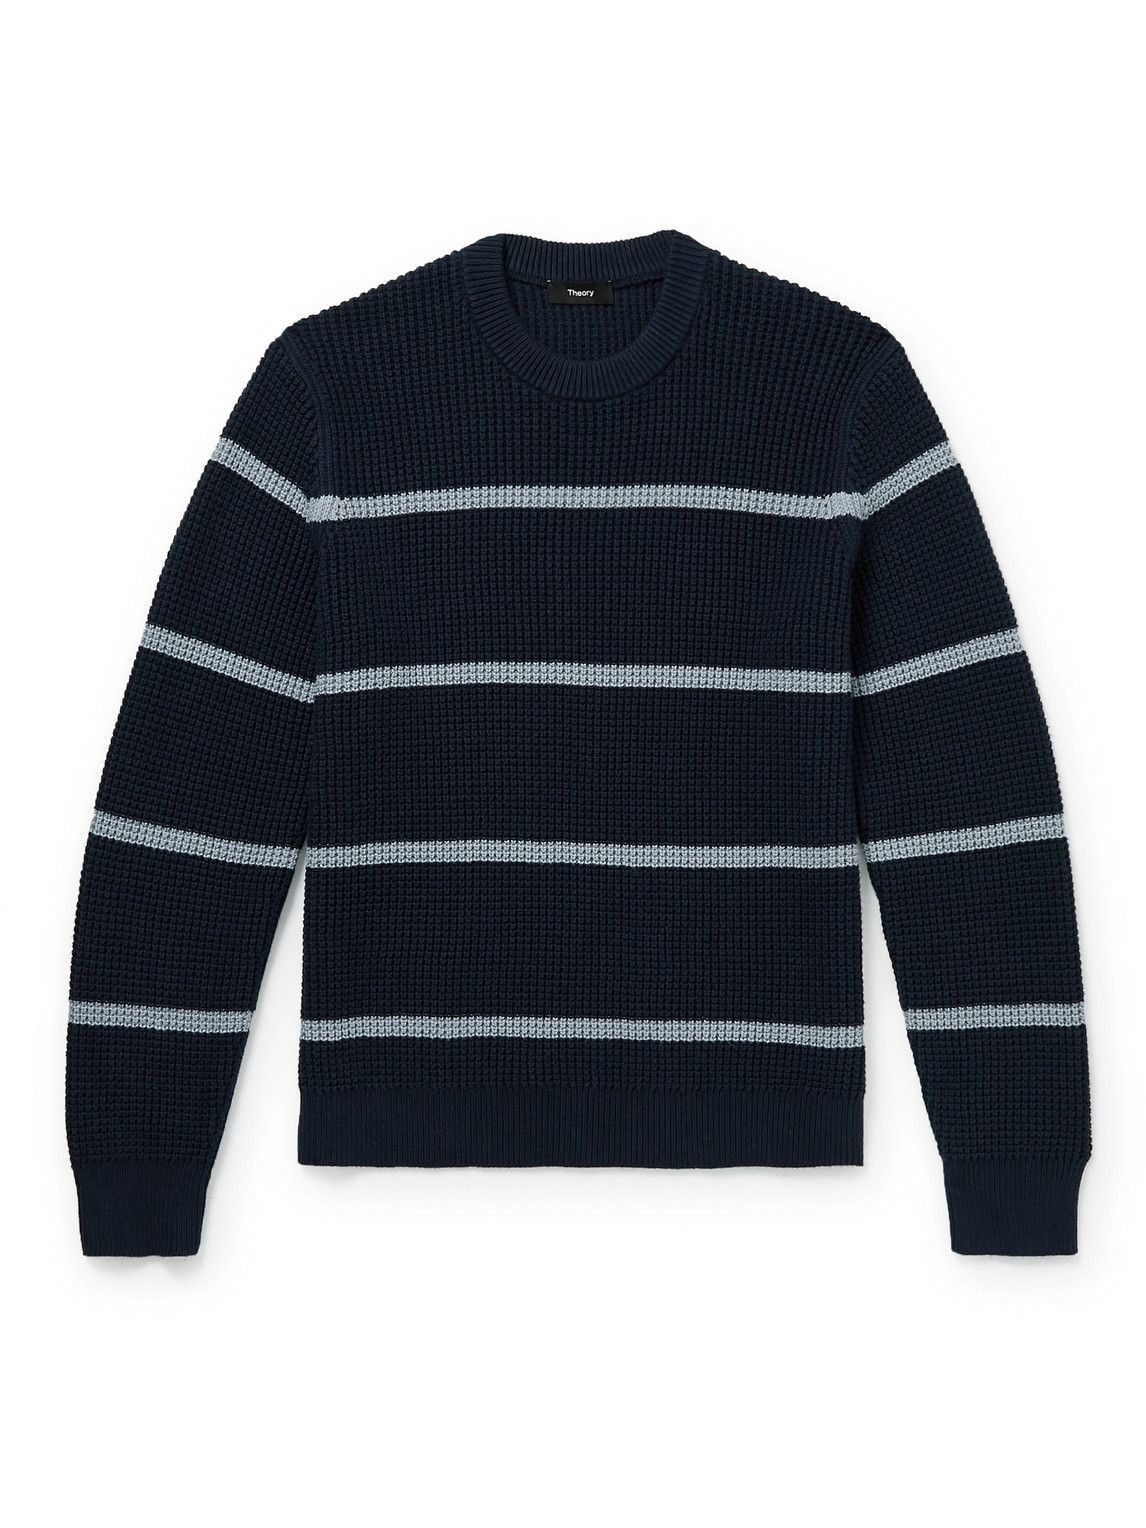 Theory - Gary Striped Cotton and Cashmere-Blend Sweater - Blue Theory